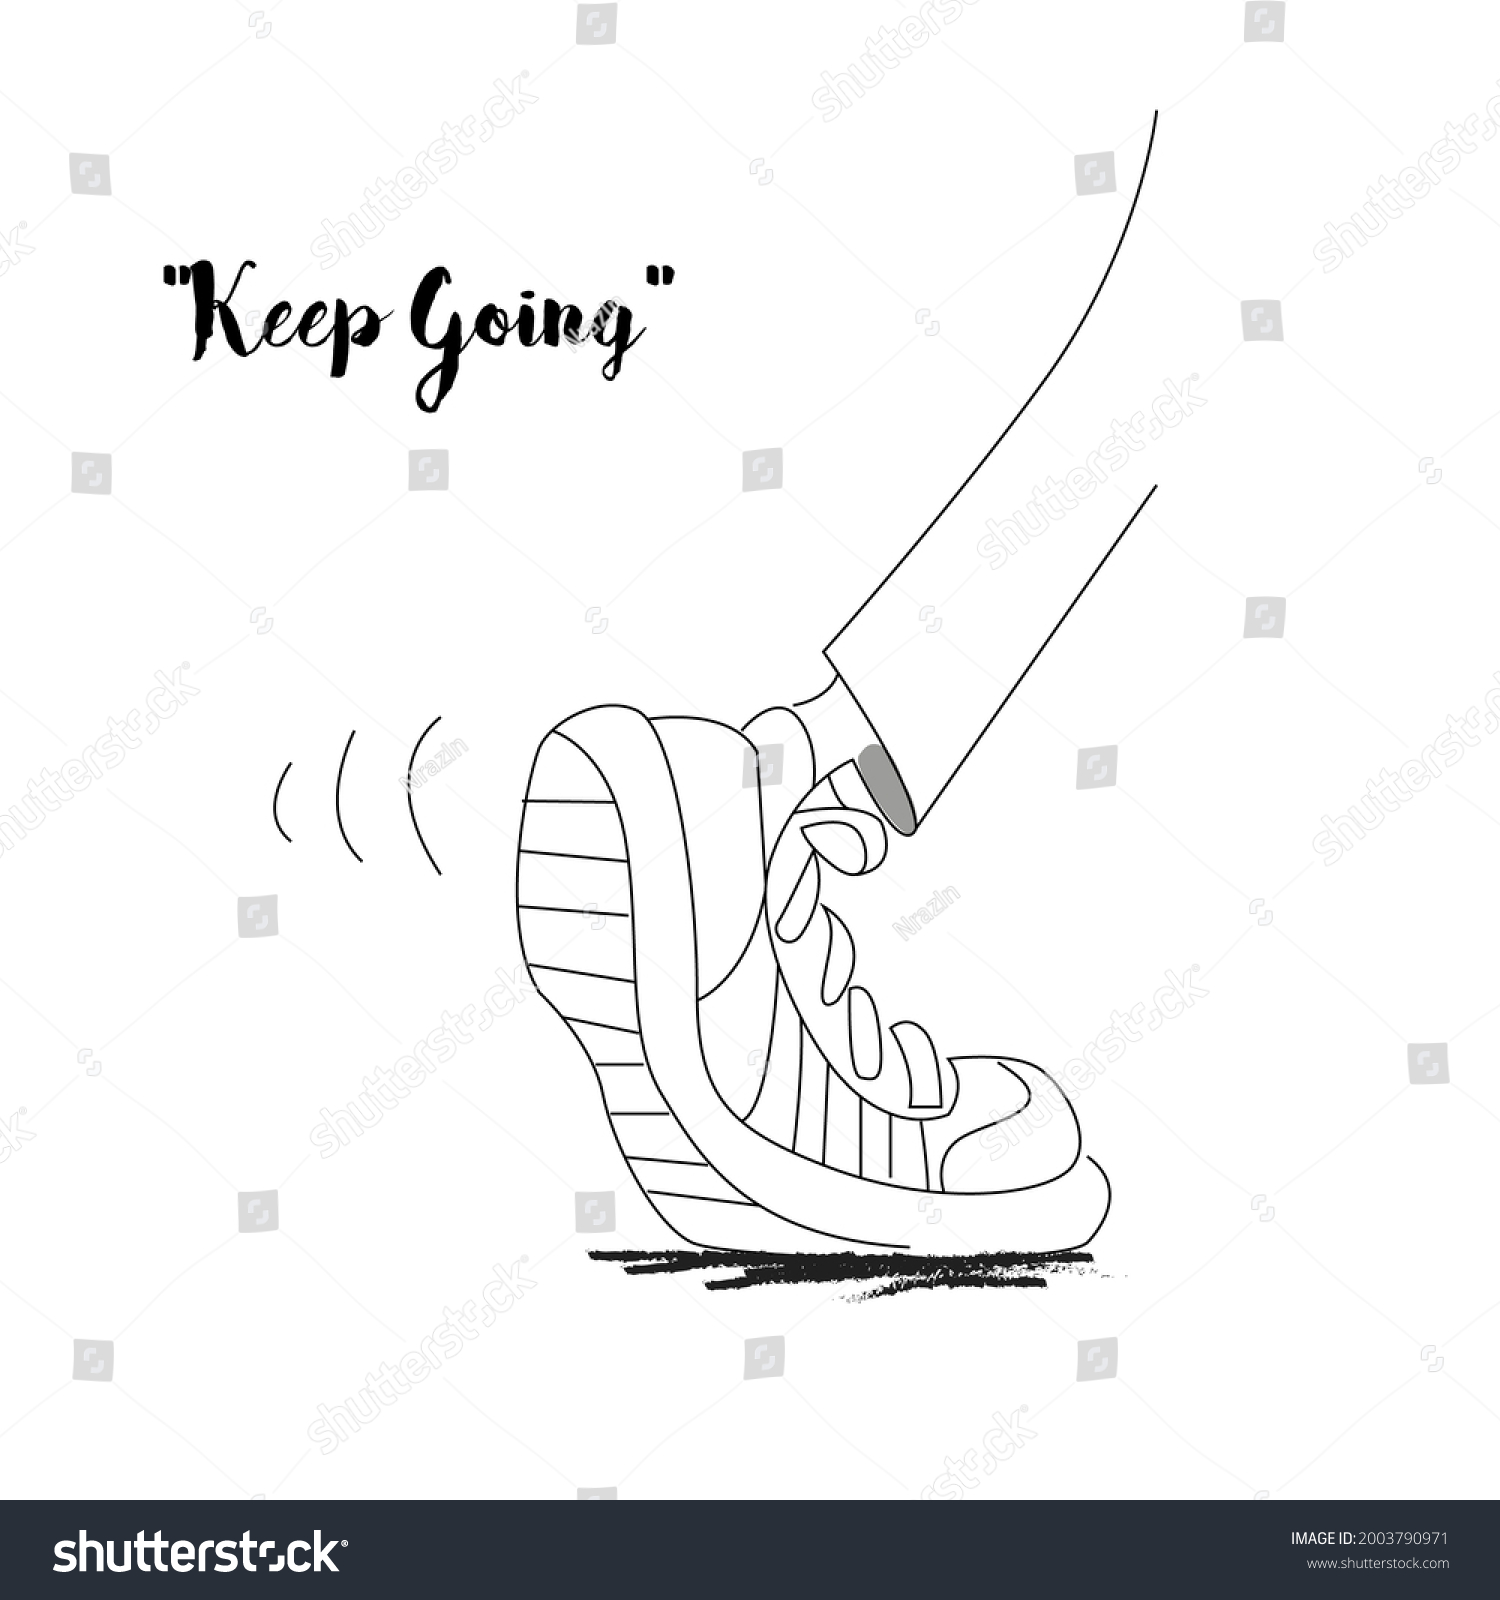 SVG of animated picture of feet stepping forward which indicates keep going and never give up svg